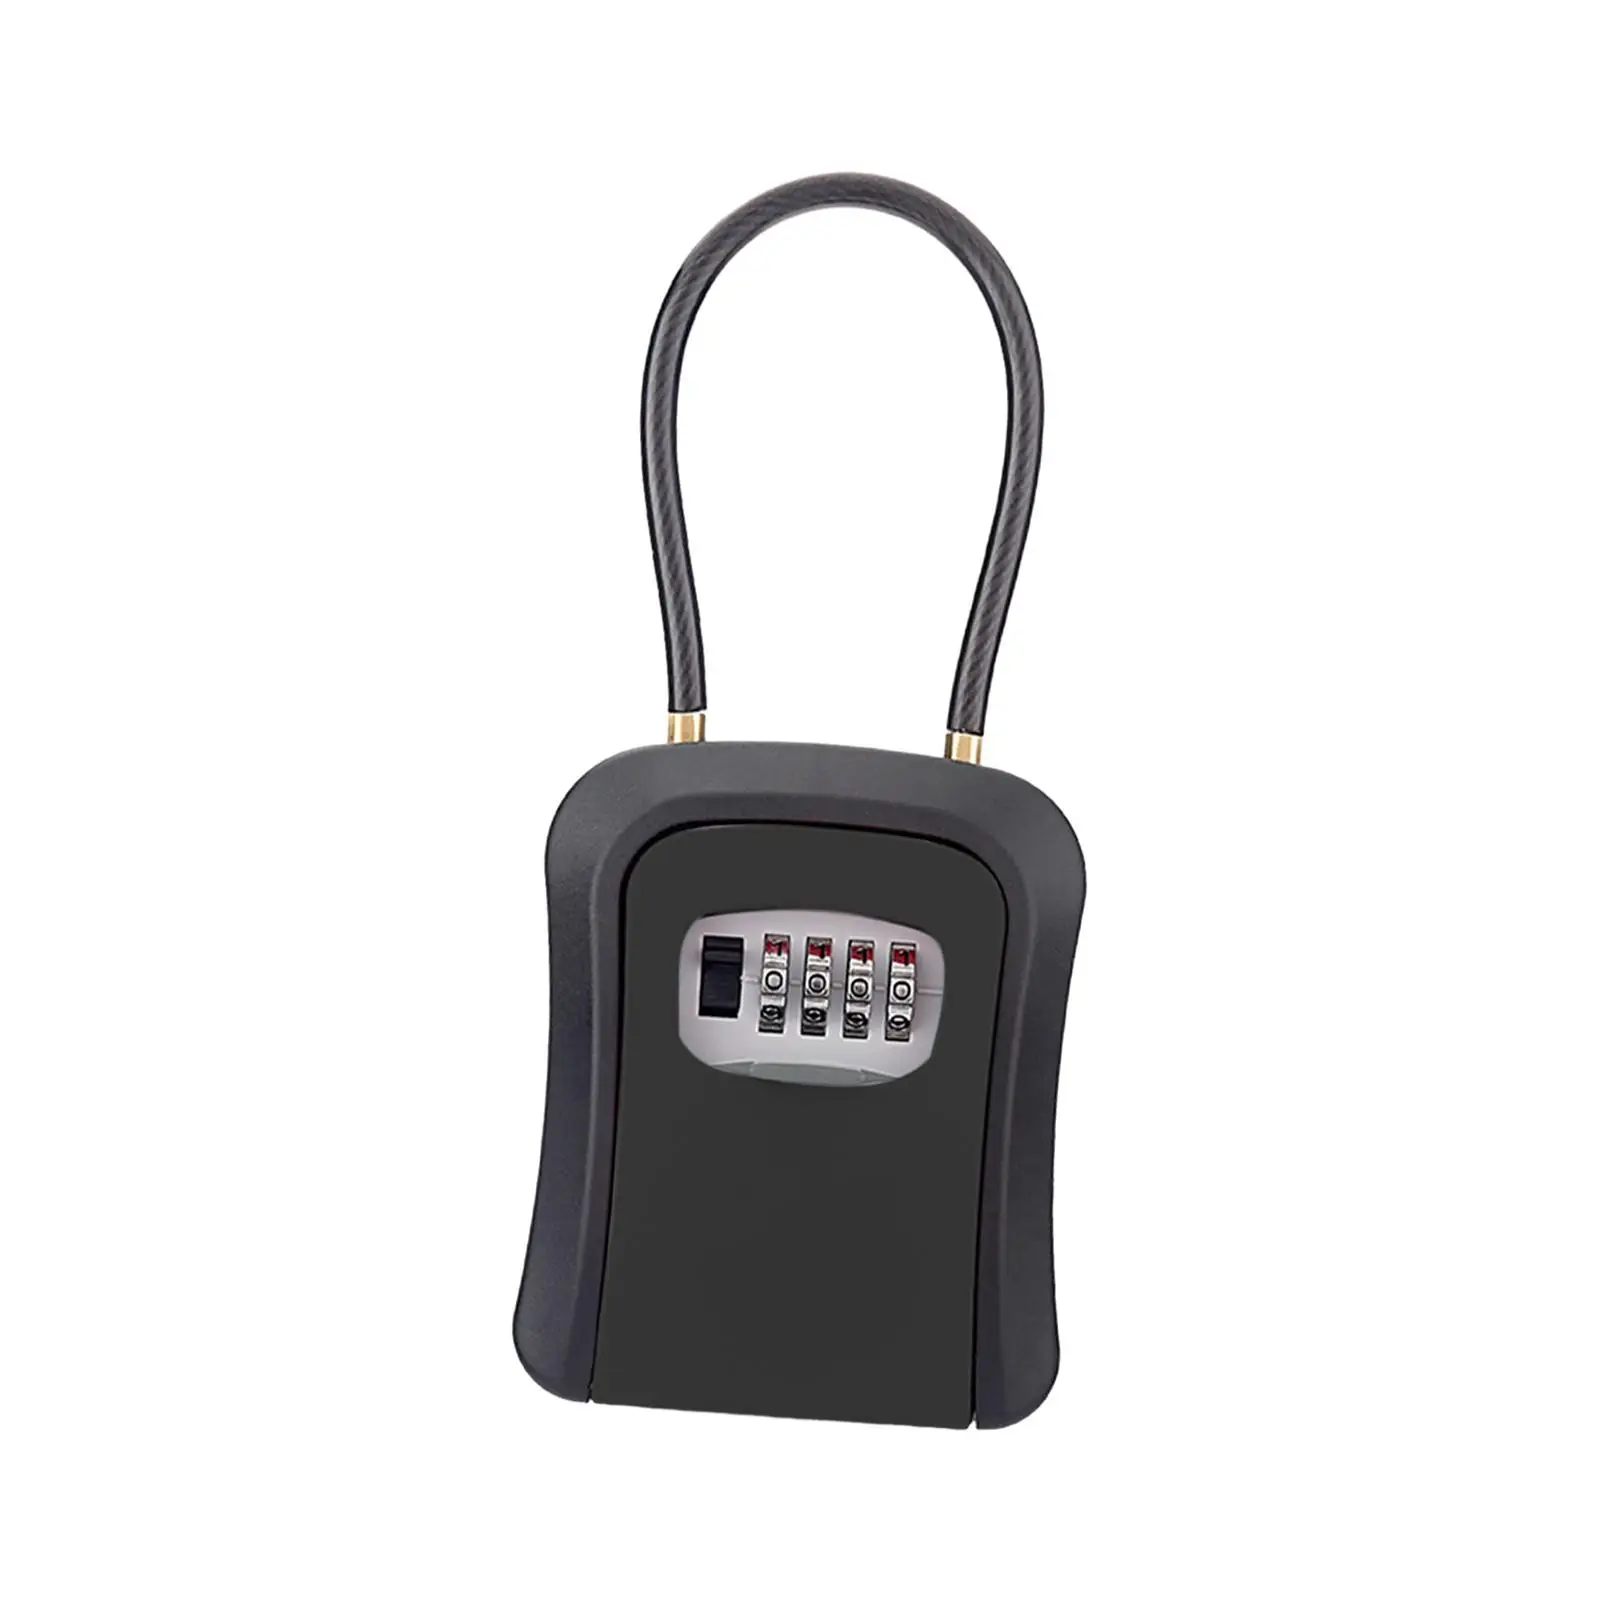 Key Lock Box Key Security Box with 4 Digit Combination Waterproof Resettable Code for House Keys Durable Lightweight Versatile